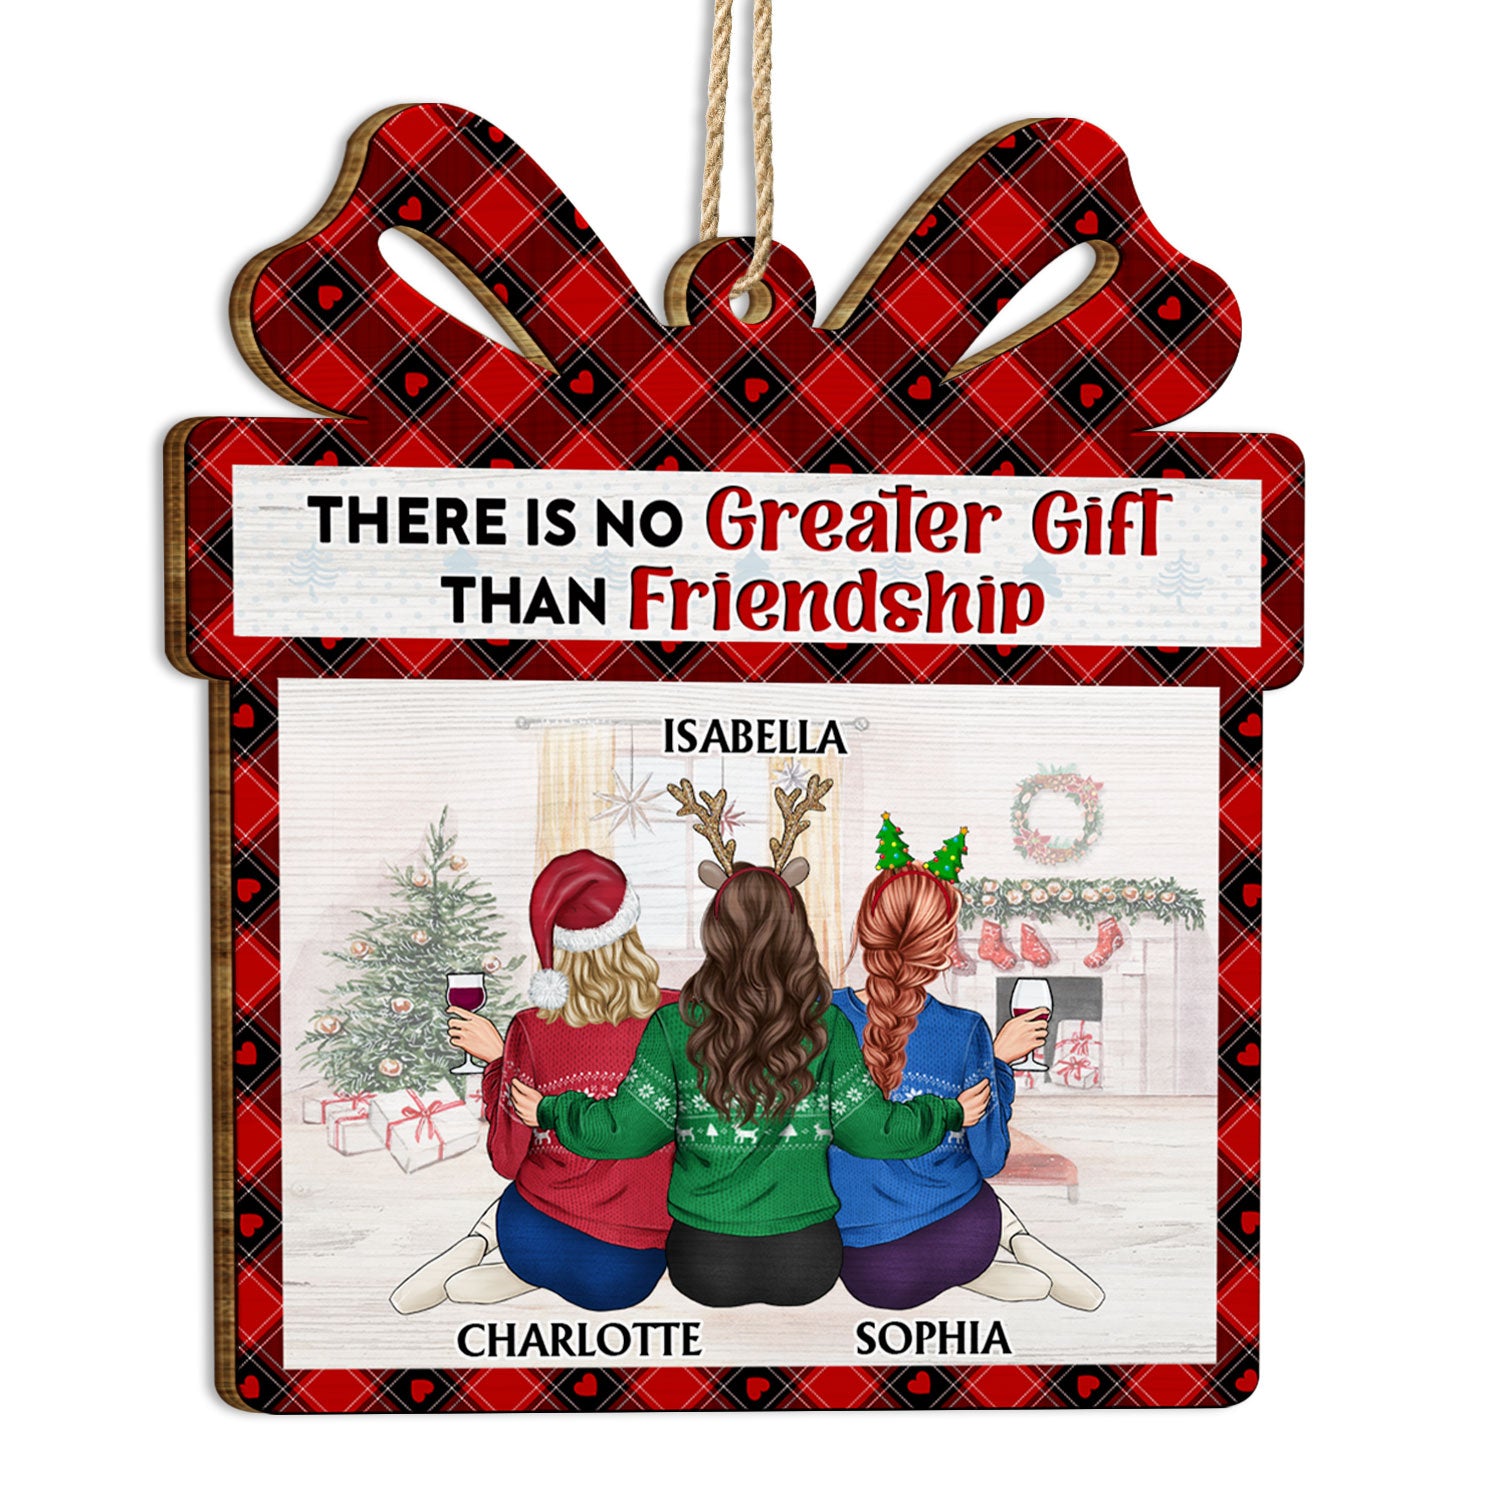 No Greater Gift Than Friendship - Christmas Gifts For Besties, Best Friends - Personalized Custom Shaped Wooden Ornament